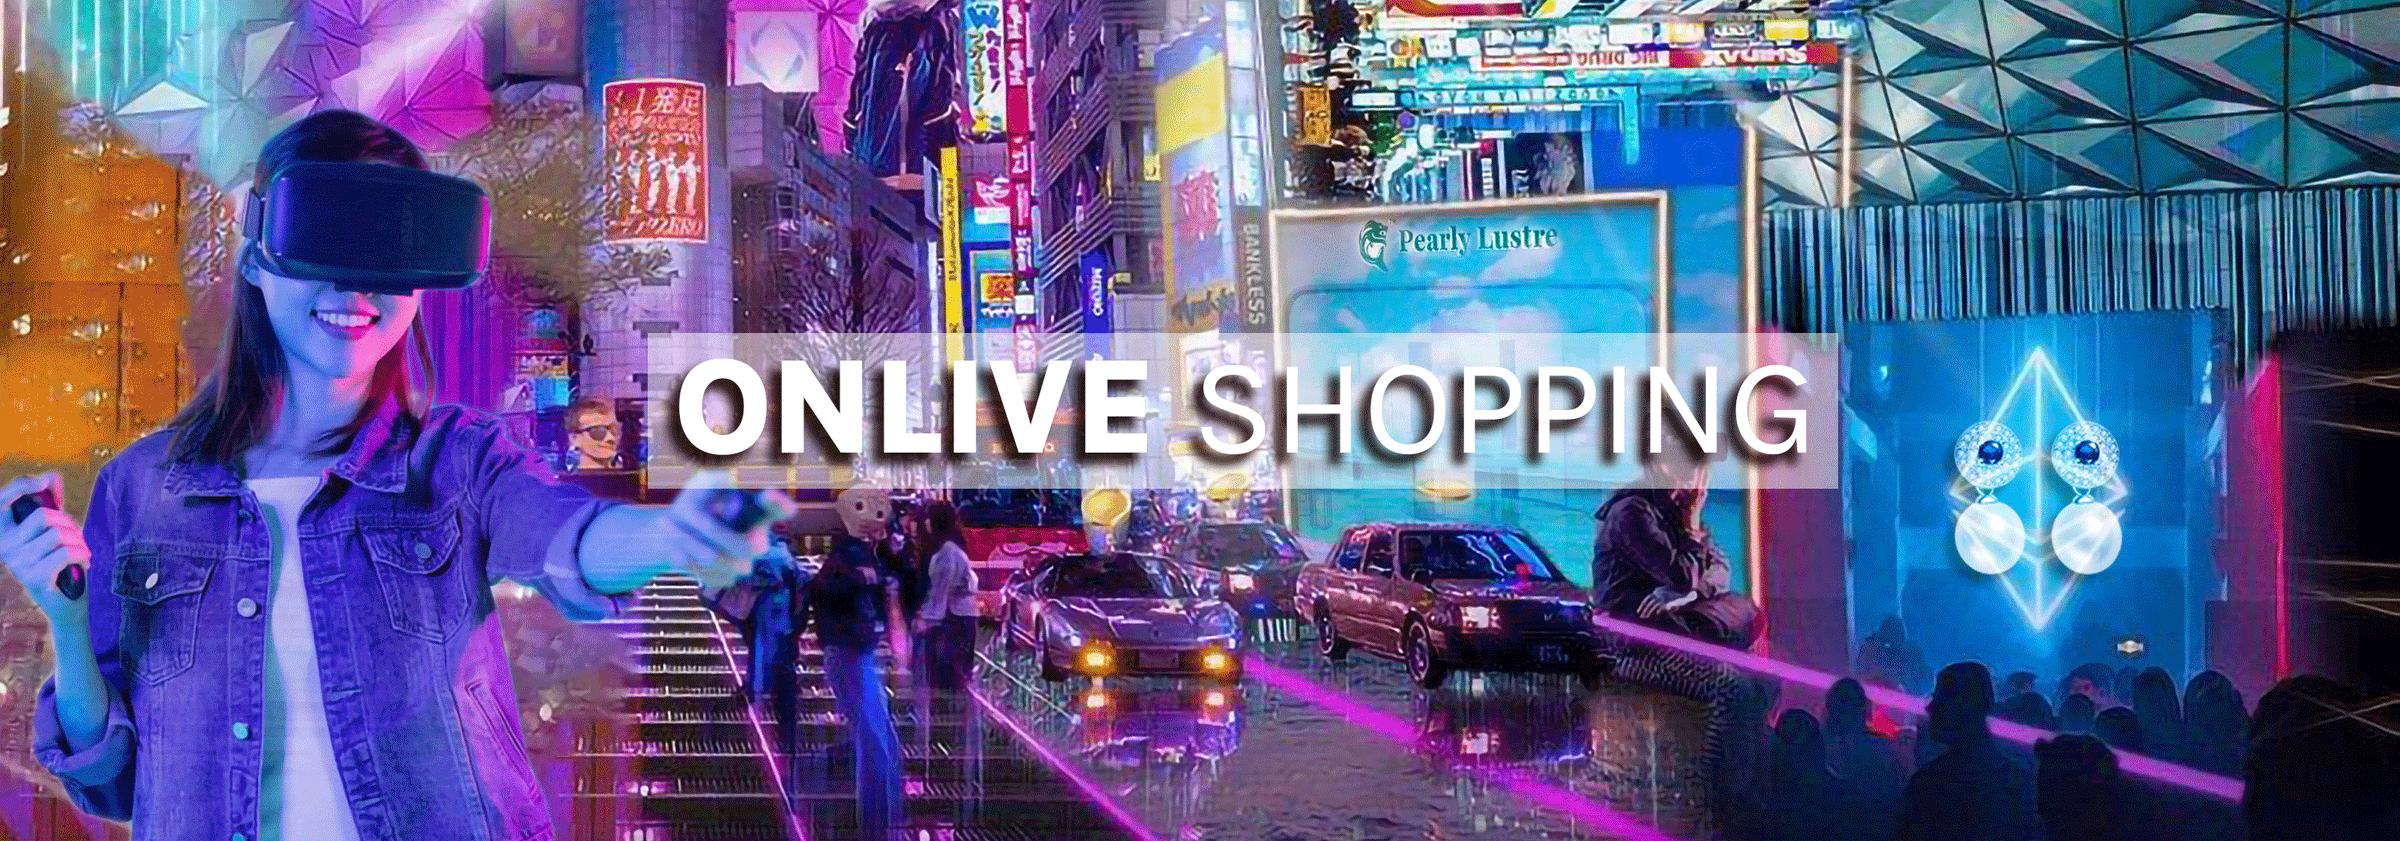 Onlive Shopping 1